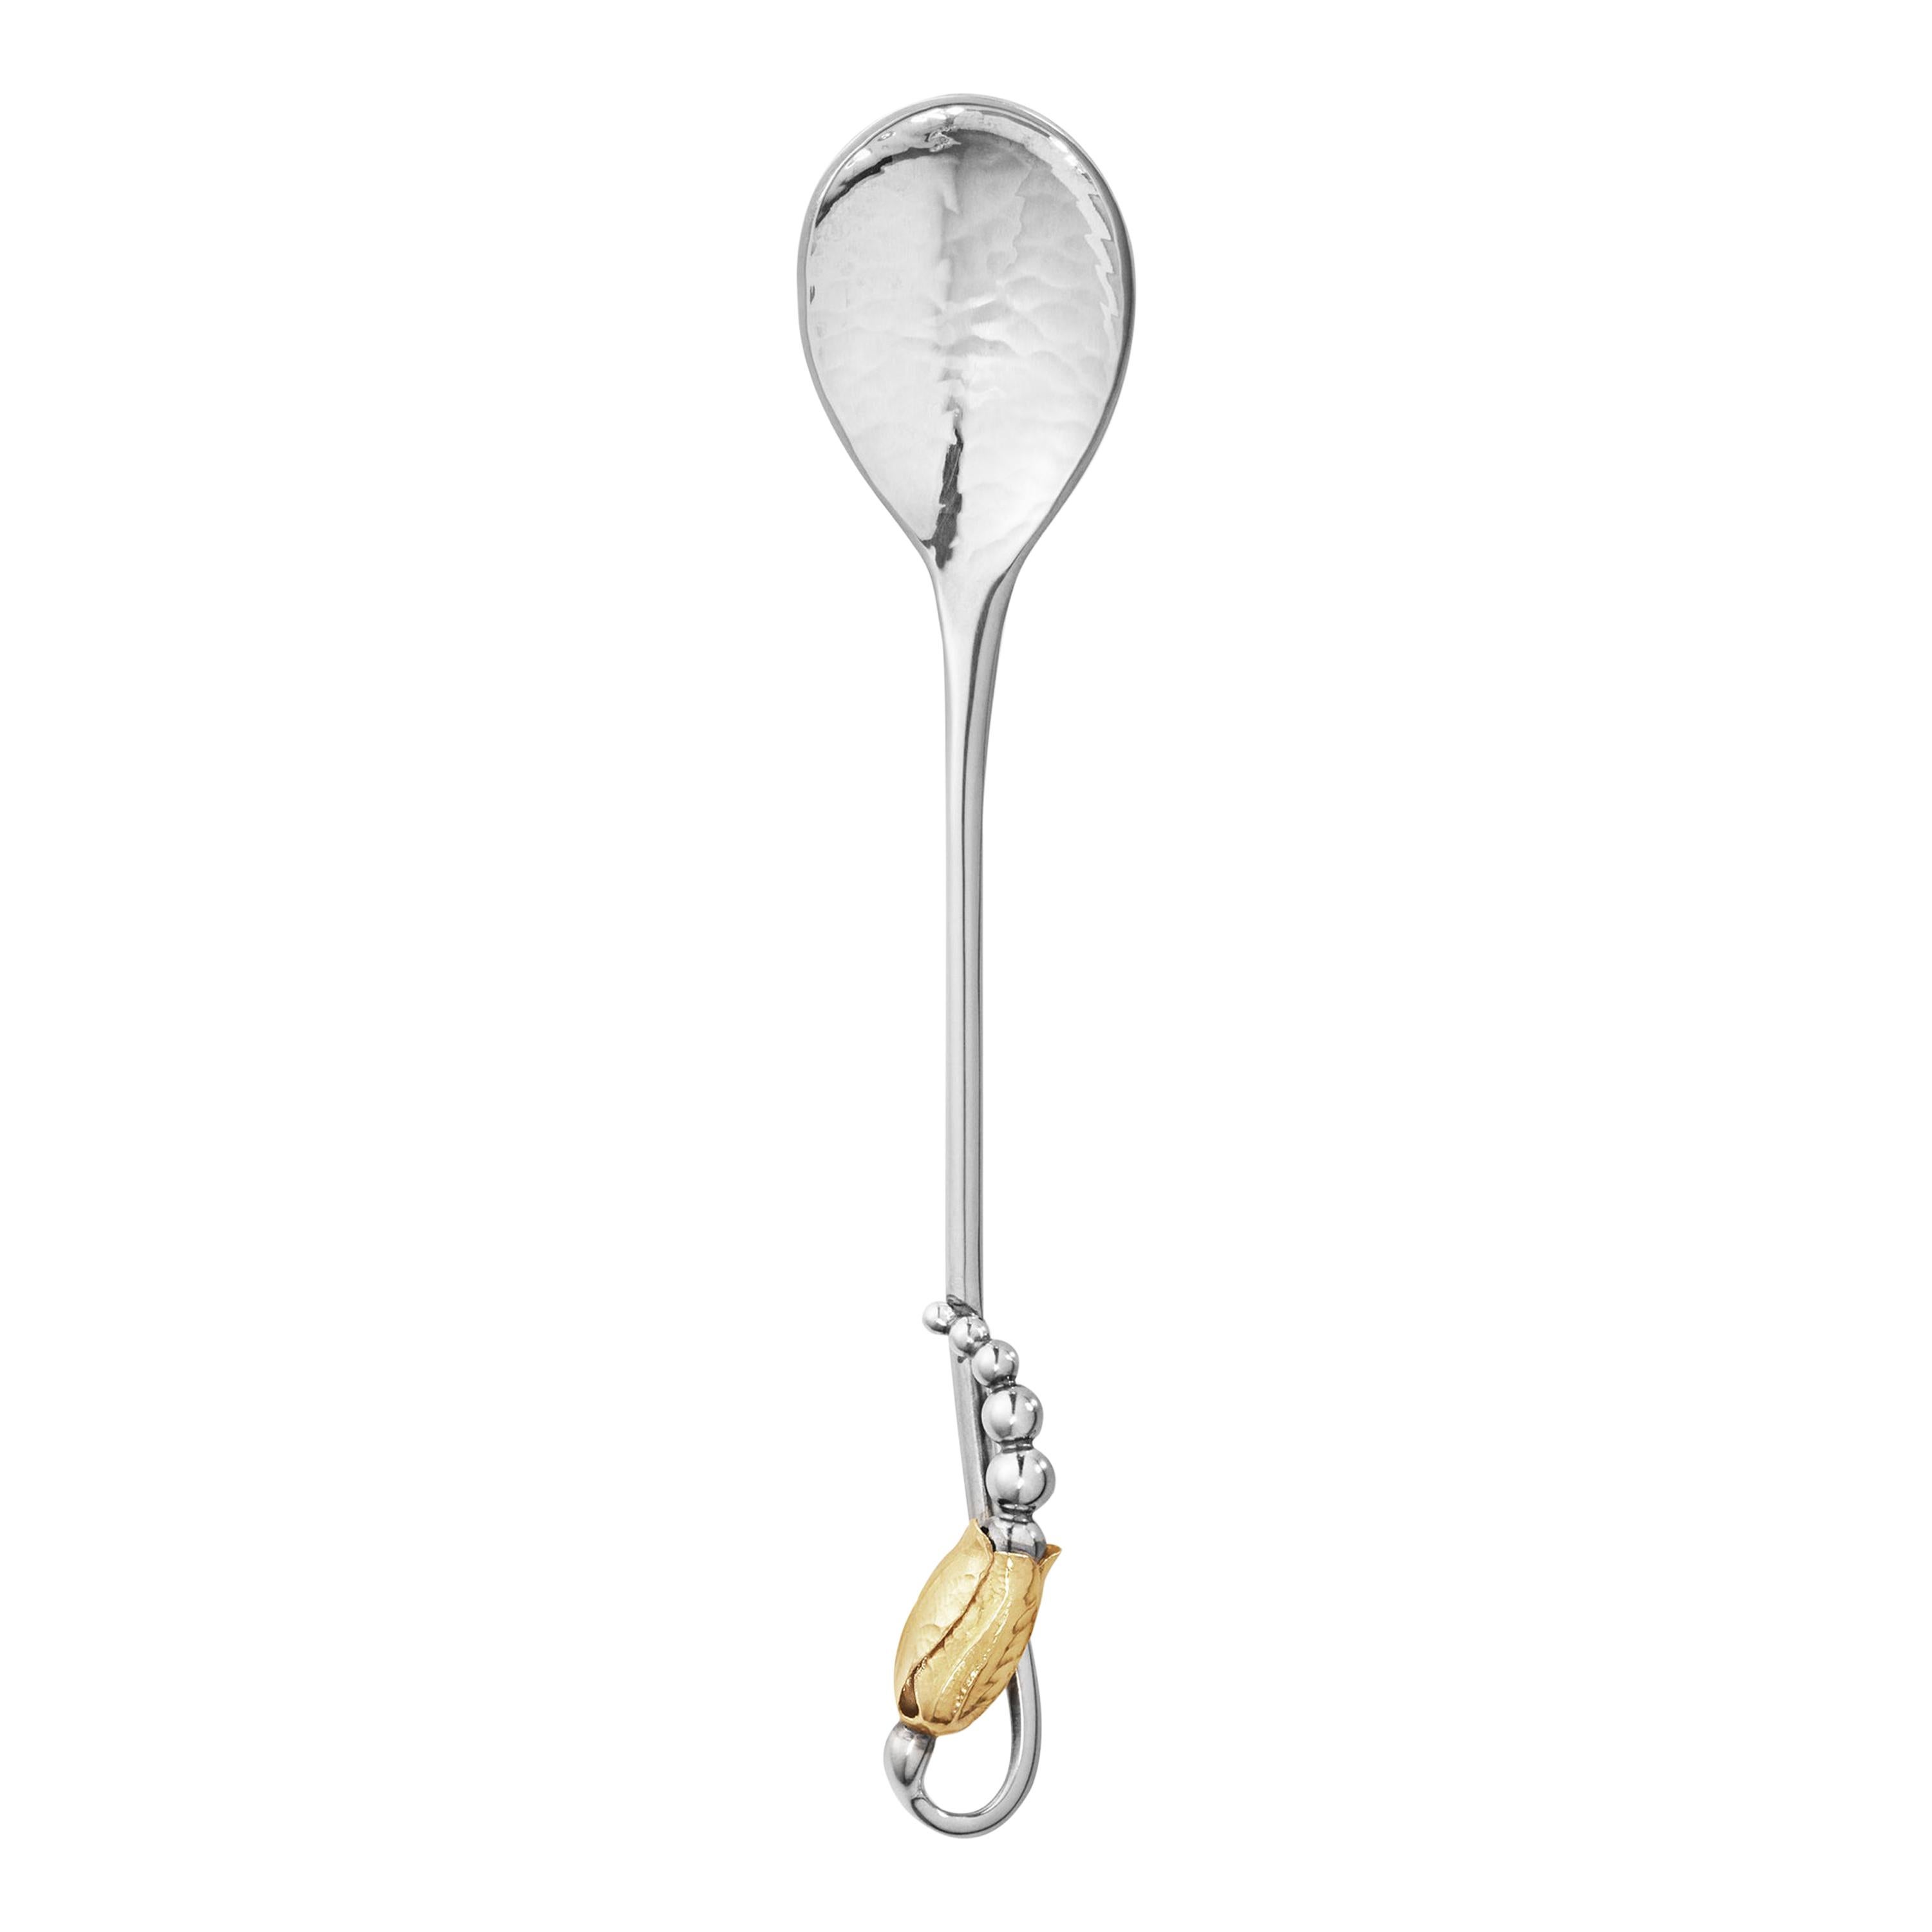 Georg Jensen Handcrafted Sterling Silver Small Teaspoon with Gold Blossom Motif